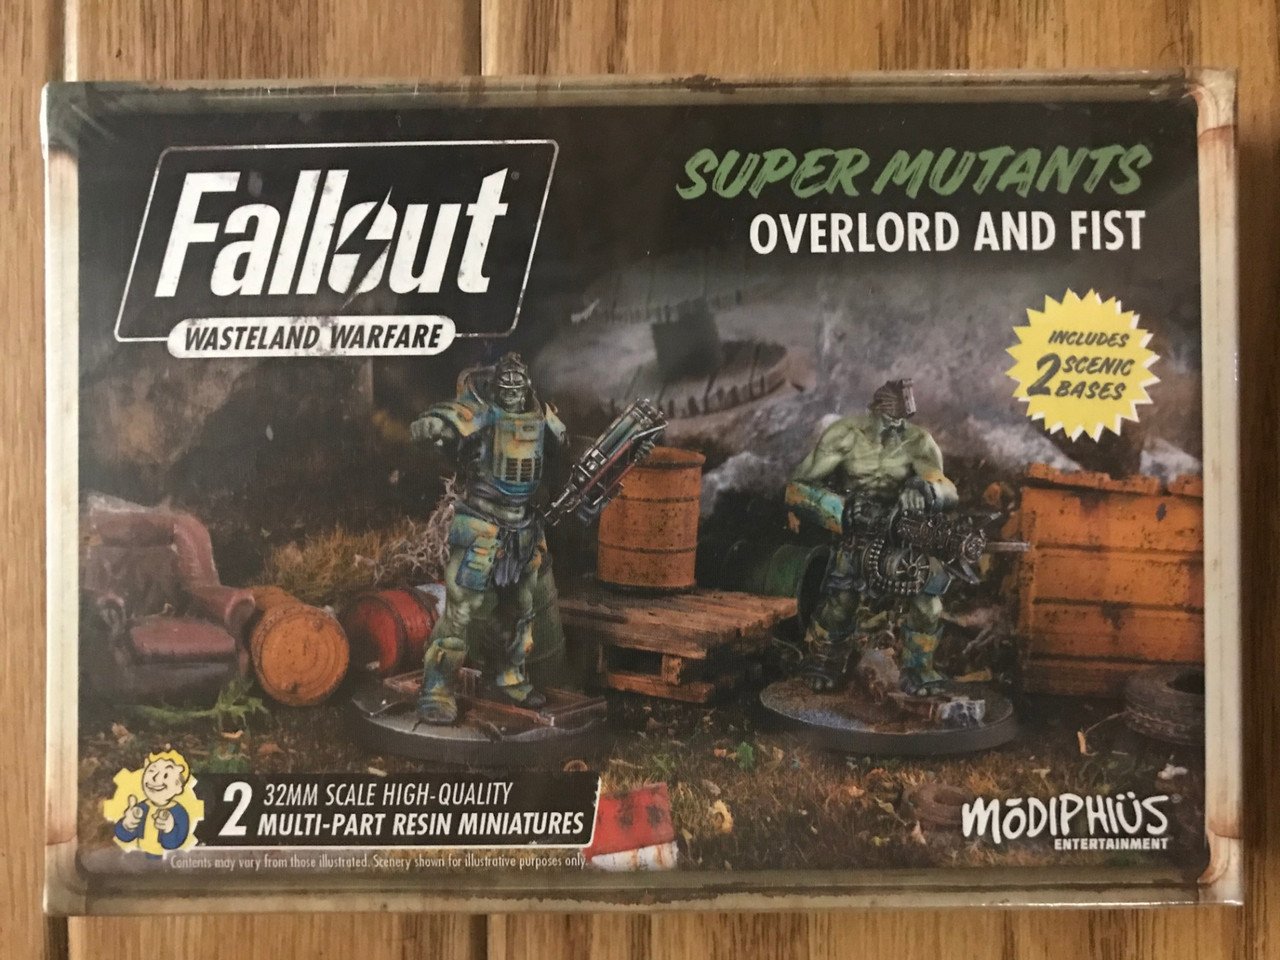 Fallout Wasteland Warfare - Super Mutants Overlord and Fist (*See Per Order Flat Rate Shipping)